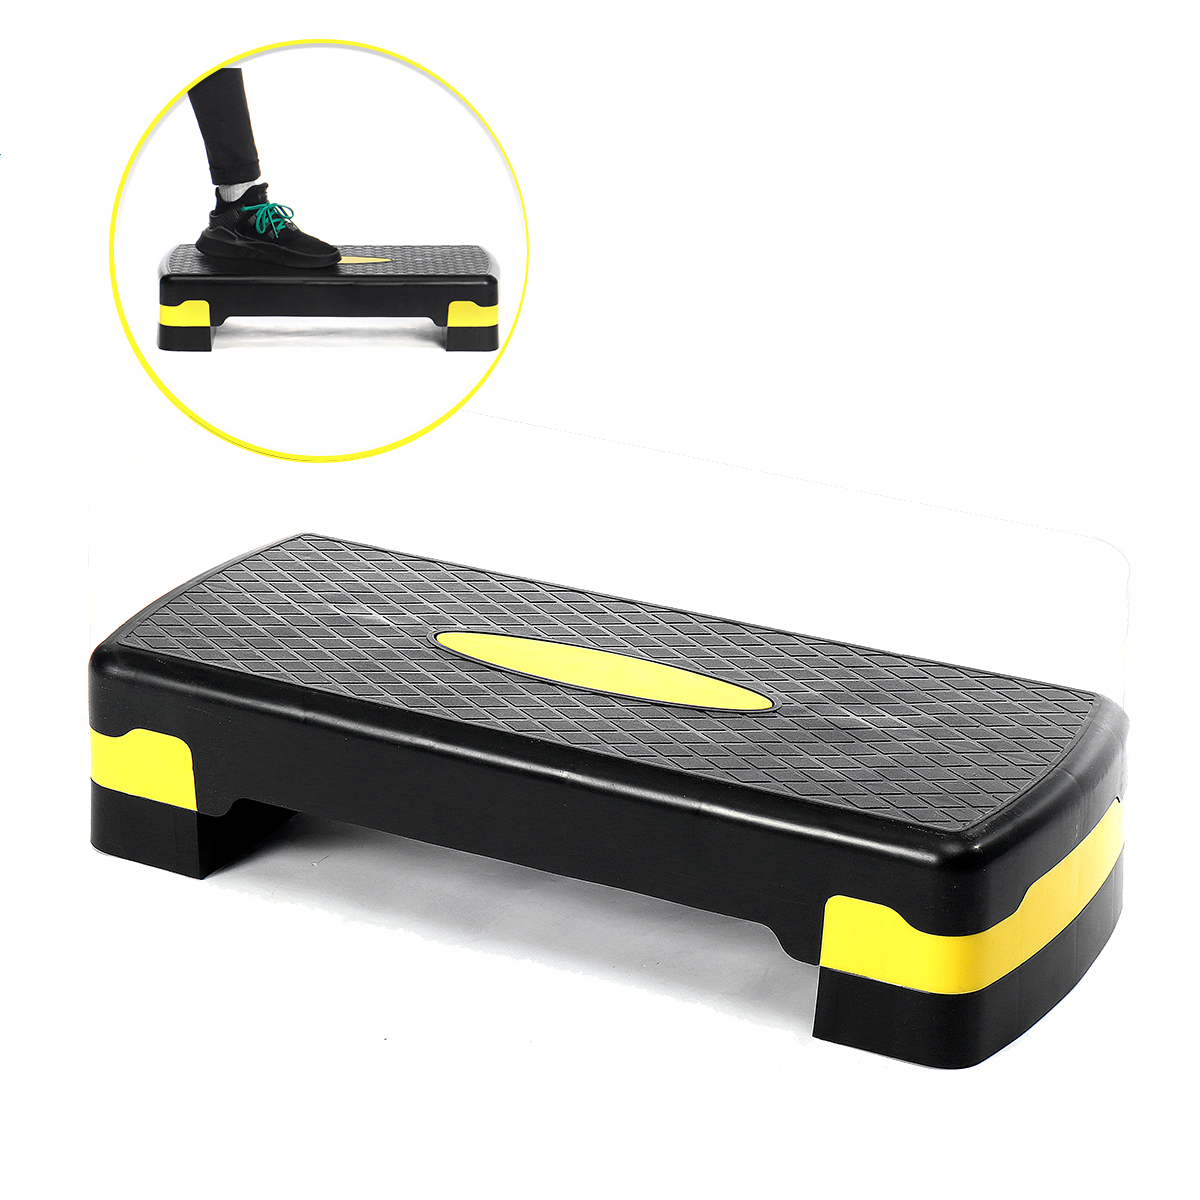 Find Fitness Pedal Non slip Yoga Aerobic Stepper Cardio Fitness Equipment Workout Exercise Tools for Sale on Gipsybee.com with cryptocurrencies